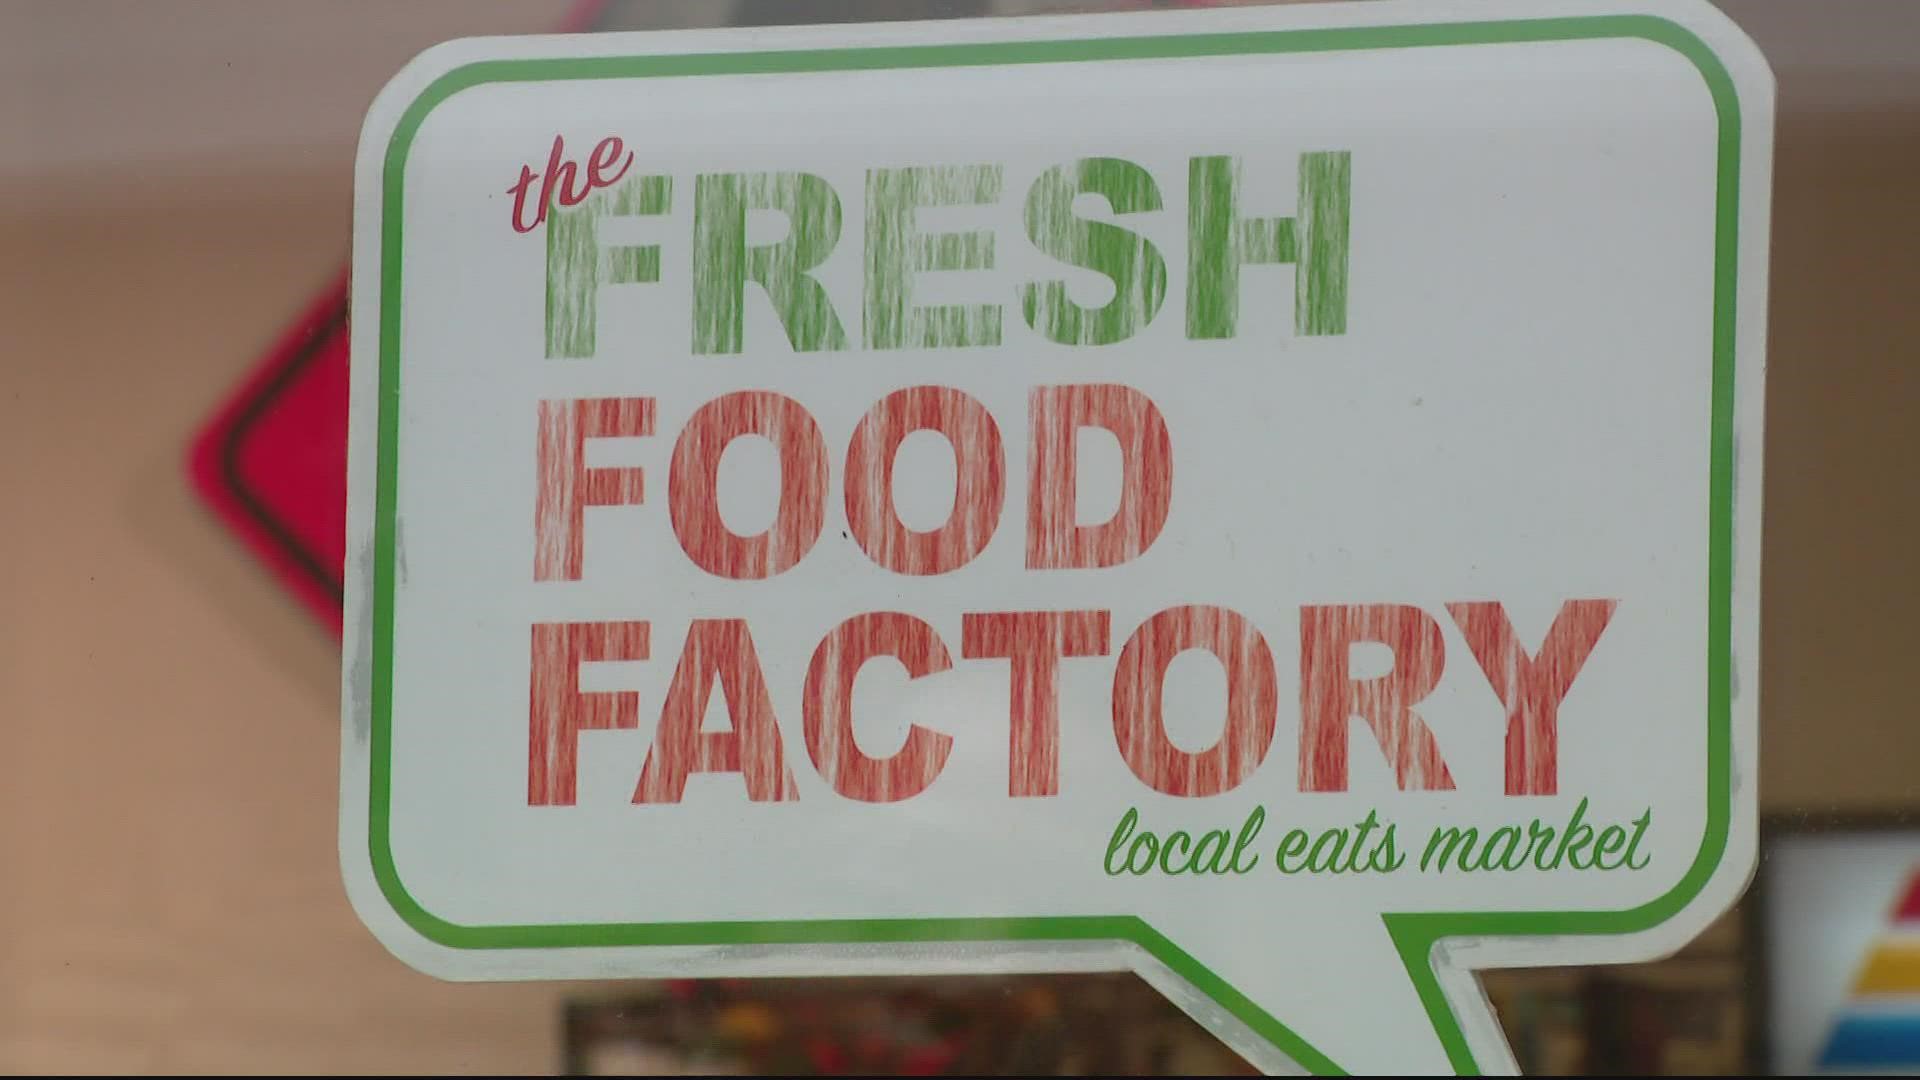 Amanda Stephenson's Fresh Food Factory addresses a need in Wards 7 and 8.